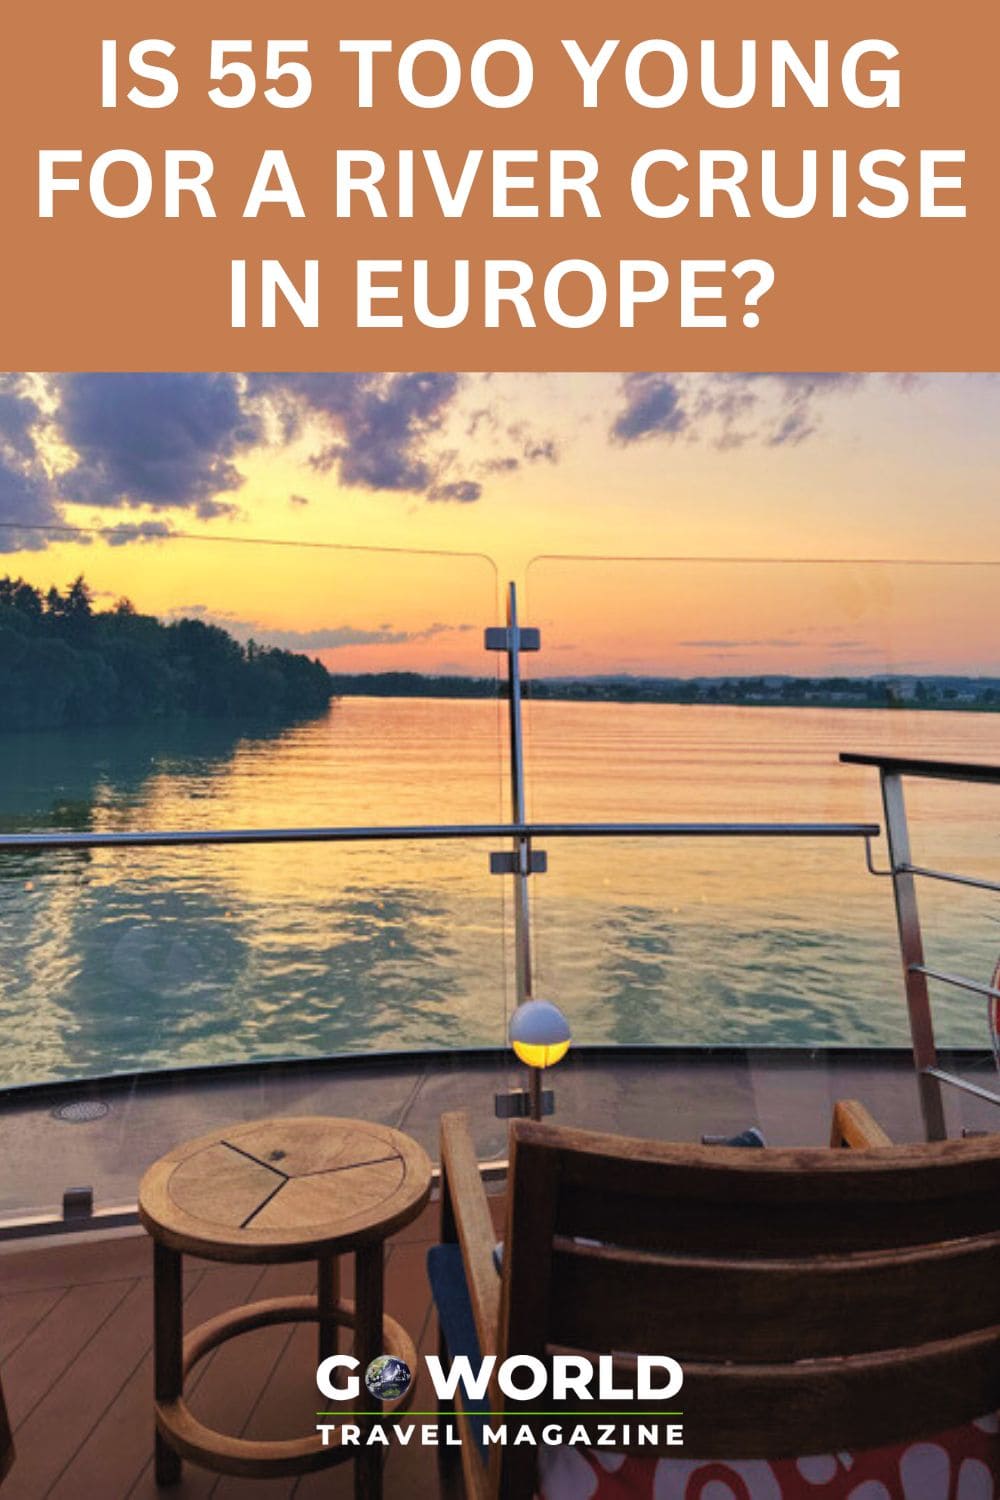 Are you too young for a river cruise in Europe? A 55-year-old couple talks about their first experience on a European Viking river cruise. #rivercruise #europeanrivercruise #vikingrivercruise